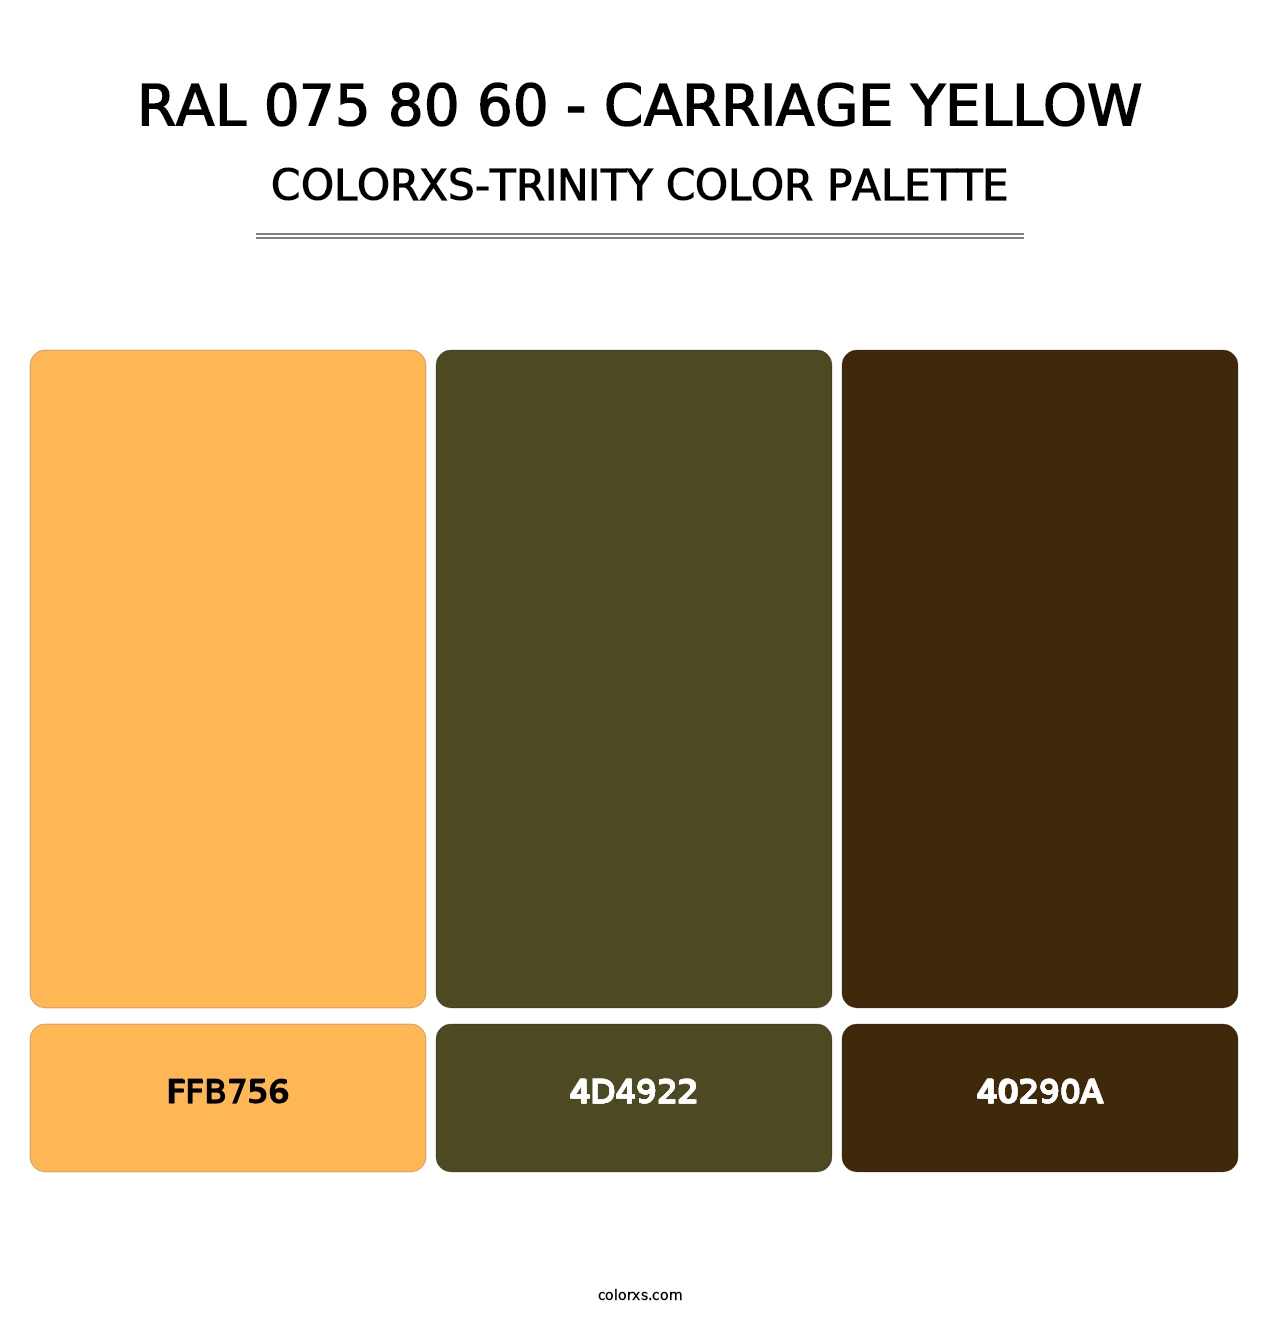 RAL 075 80 60 - Carriage Yellow - Colorxs Trinity Palette